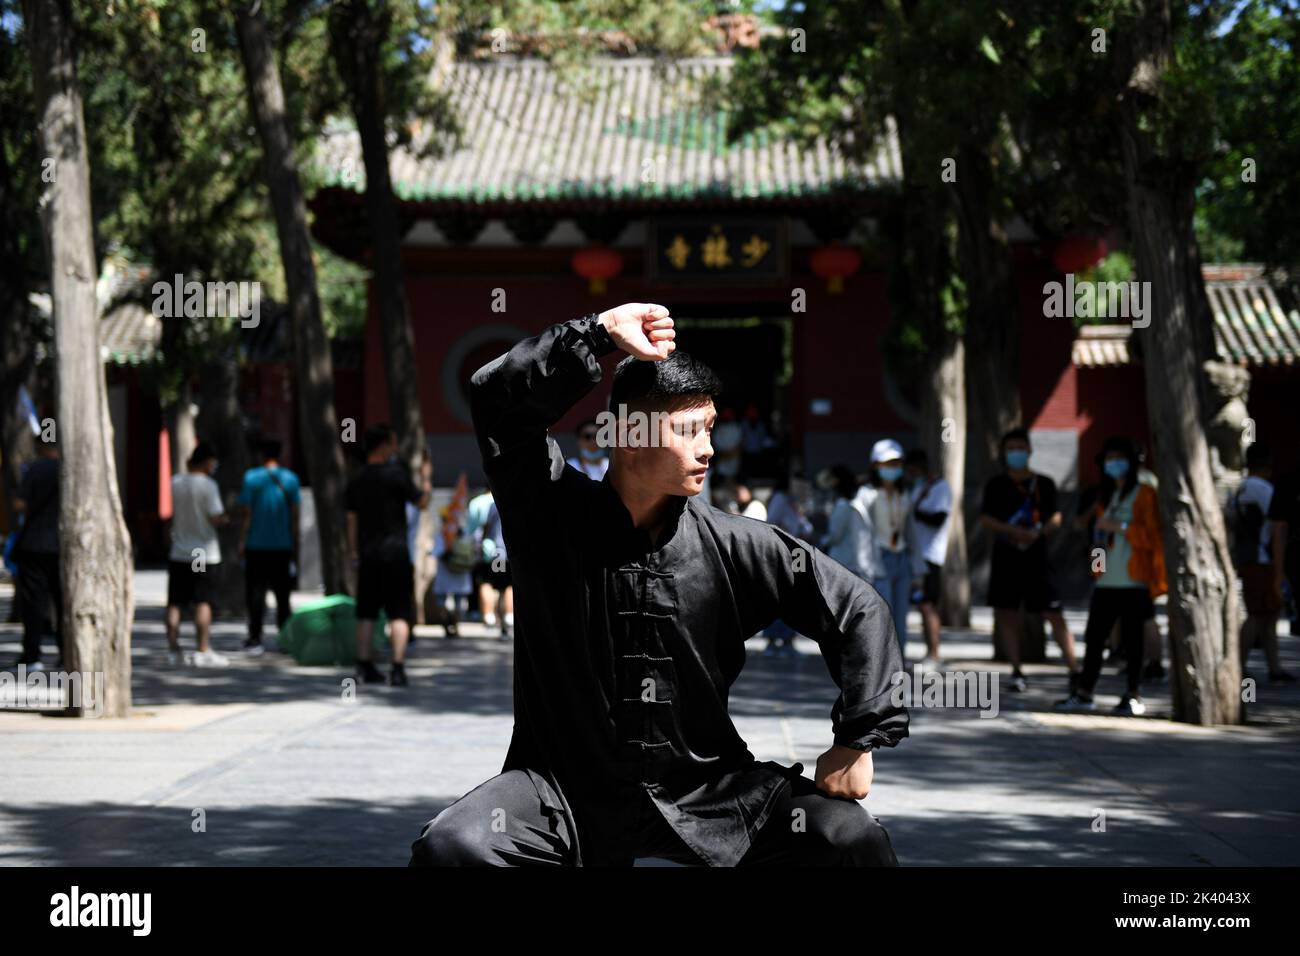 (220929) -- ZHENGZHOU, Sept. 29, 2022 (Xinhua) -- Li Yinggang practices martial arts at Shaolin Temple in Songshan, central China's Henan province, July 7, 2022. 25-year-old Li Yinggang is a coach at Shaolin Tagou Martial Arts School in Songshan, central China's Henan province. He started martial arts practise at the age of 9 and shifted to free combat 3 years later. Since he was 16 years old, Li has been taking part in the professional free combat competitions, ever winning the titles of domestic and international events several times including two golden belts of Chinese National Free Comba Stock Photo